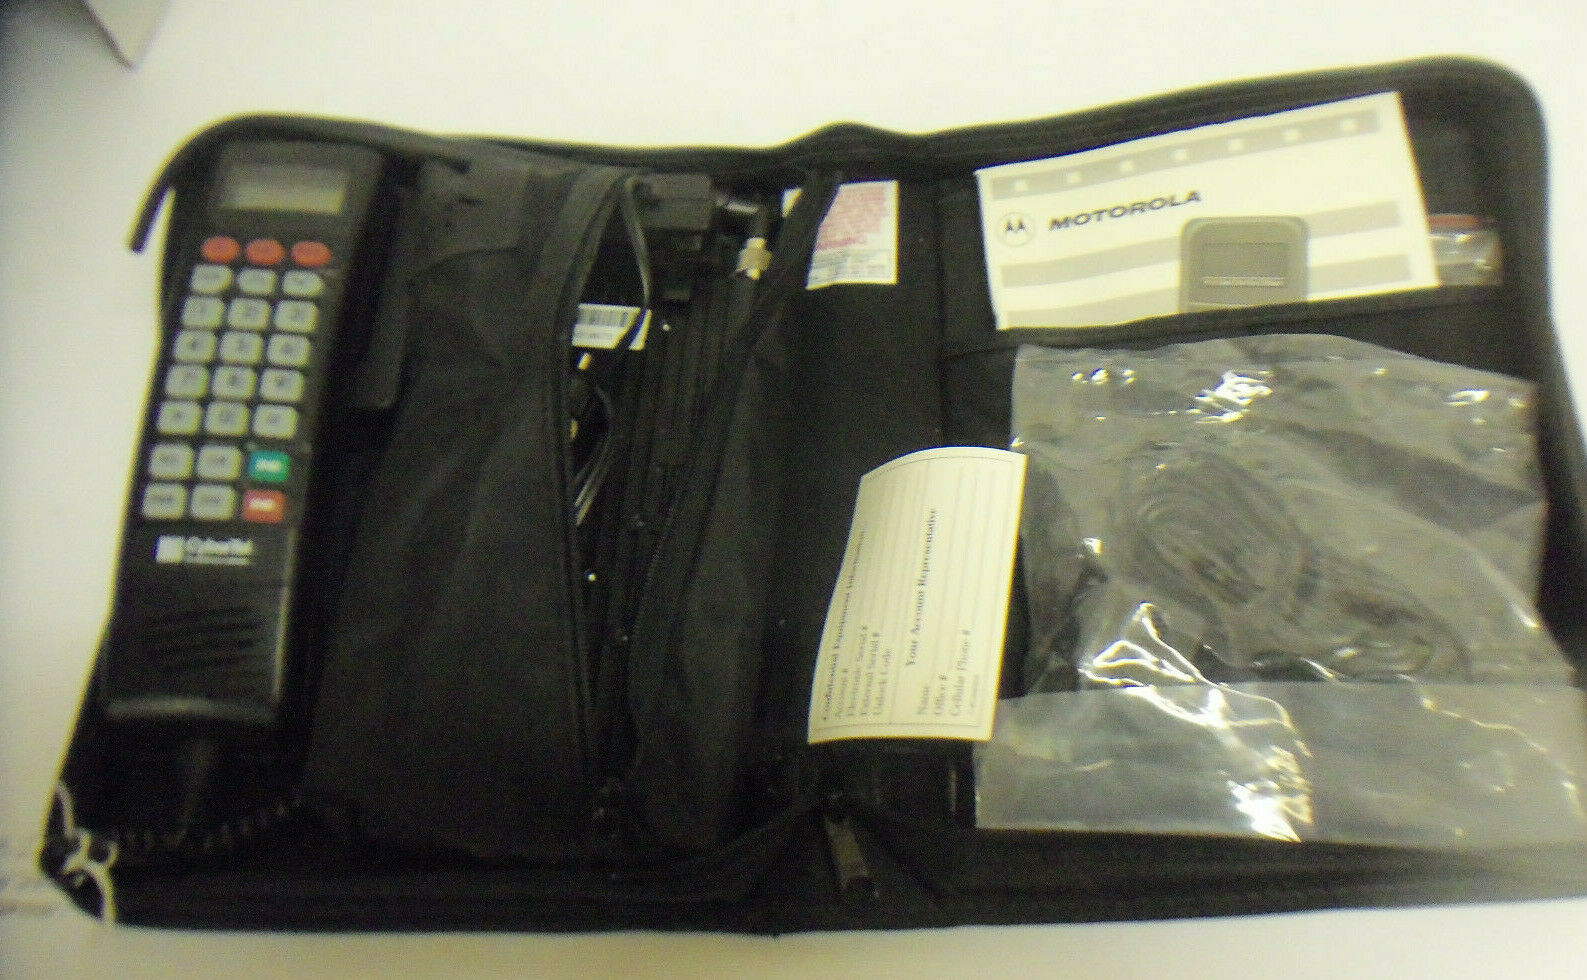 Vintage Motorola Car Phone Scn2520a With Bag And Books 1993 Ser. No. Gug(15) Usa